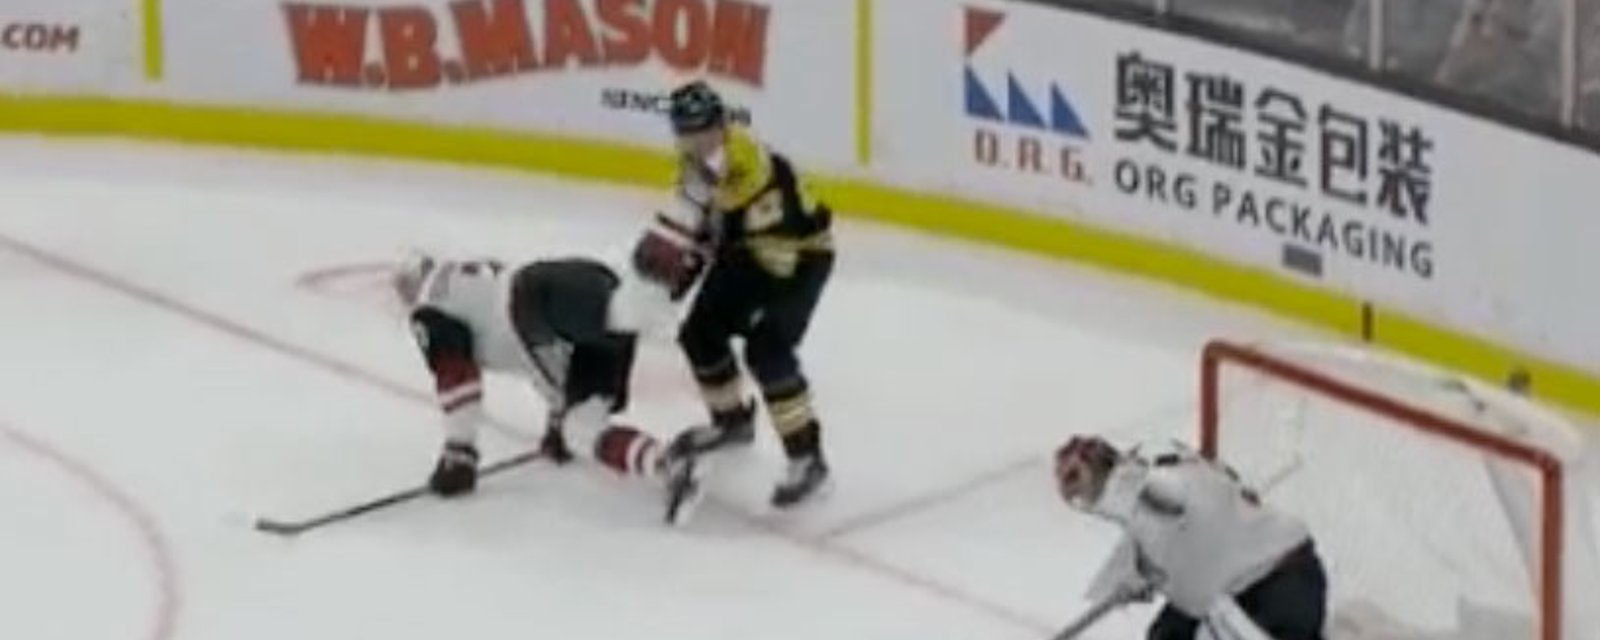 Breaking: Backes' face gets lacerated by skate during bout against Coyotes! 